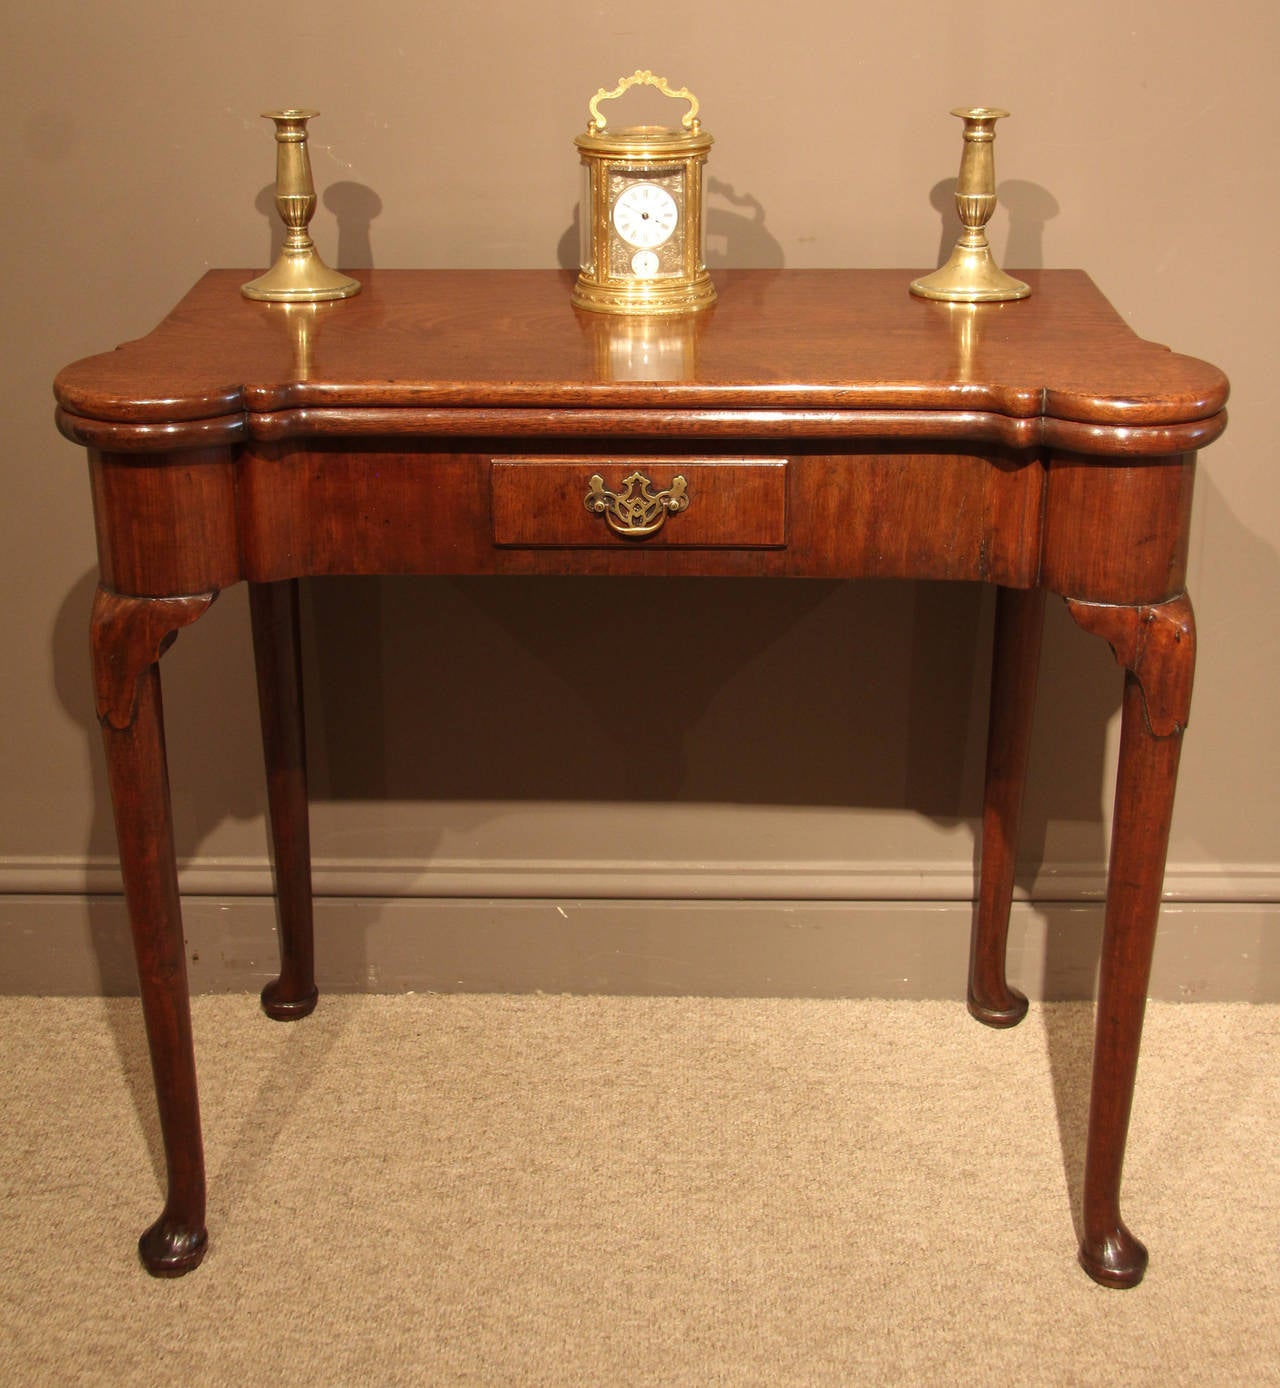 A fine example of a George II red walnut pad foot card table with lappet carved legs and a single drawer to the frieze. The base lined interior has counter trays, circa 1740. 
Shown with engraved oval carriage clock with alarum, circa 1885 £3,850.